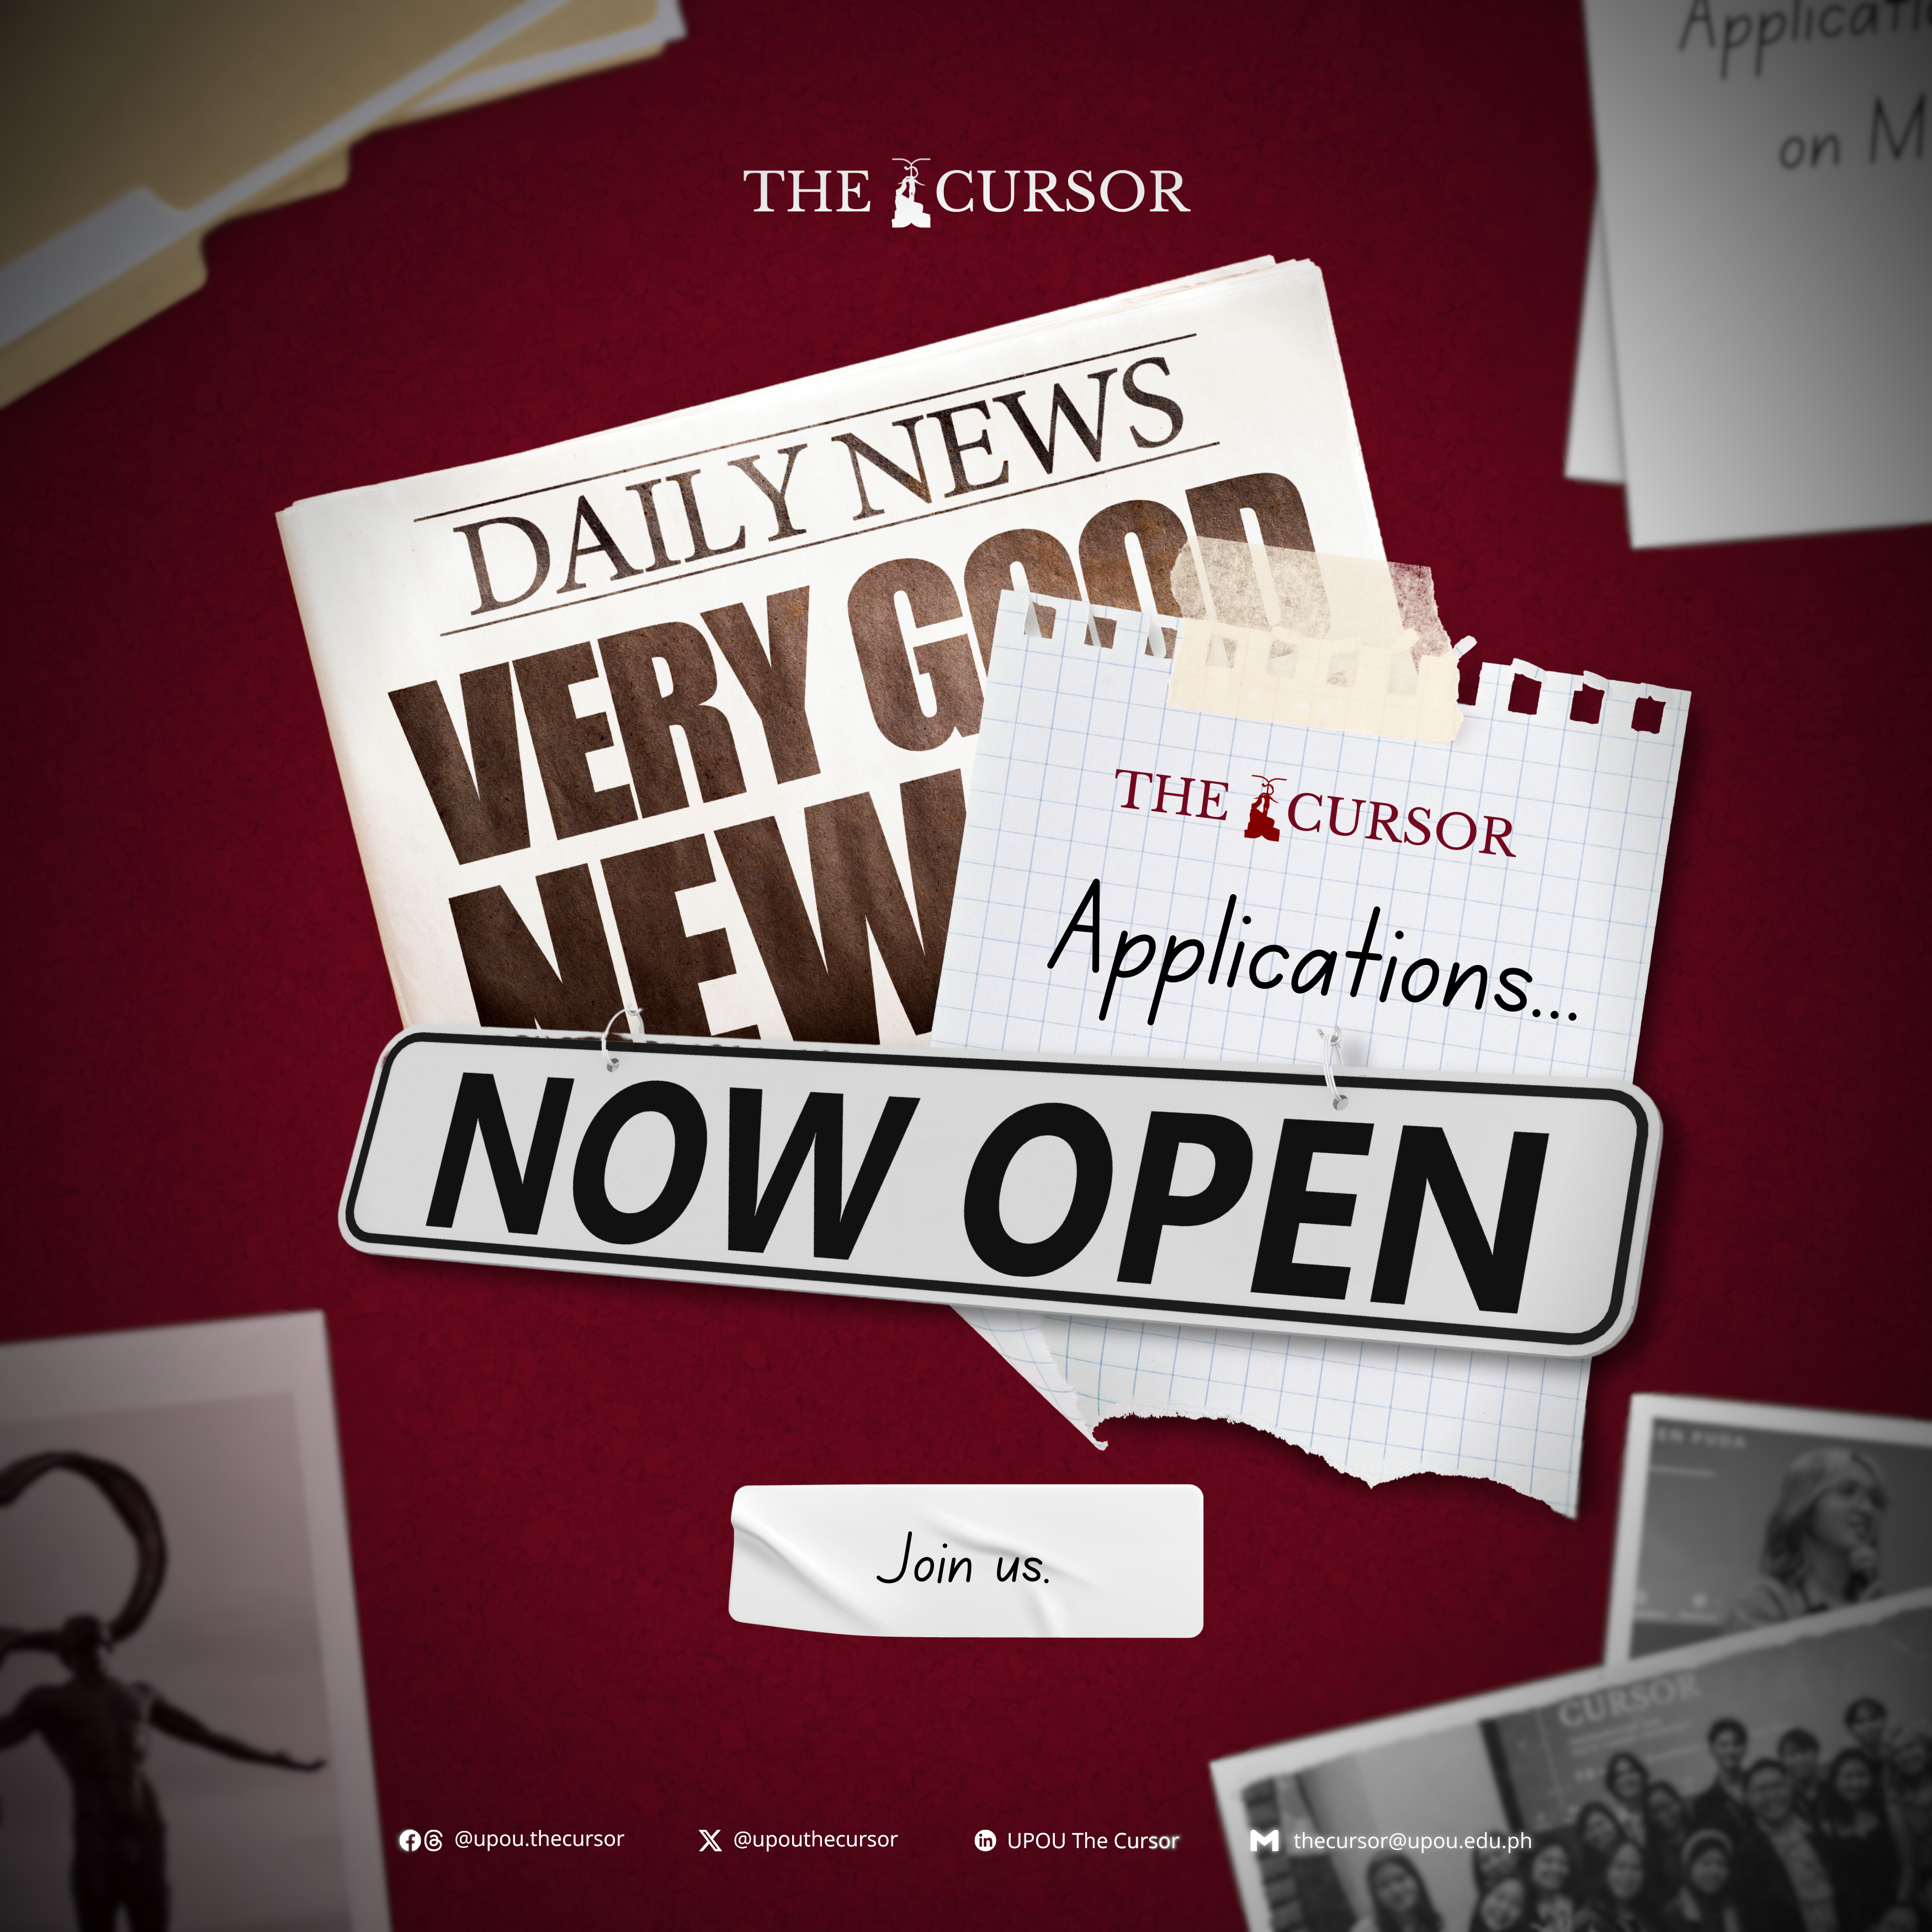 VERY GOOD NEWS  Application  NOW OPEN